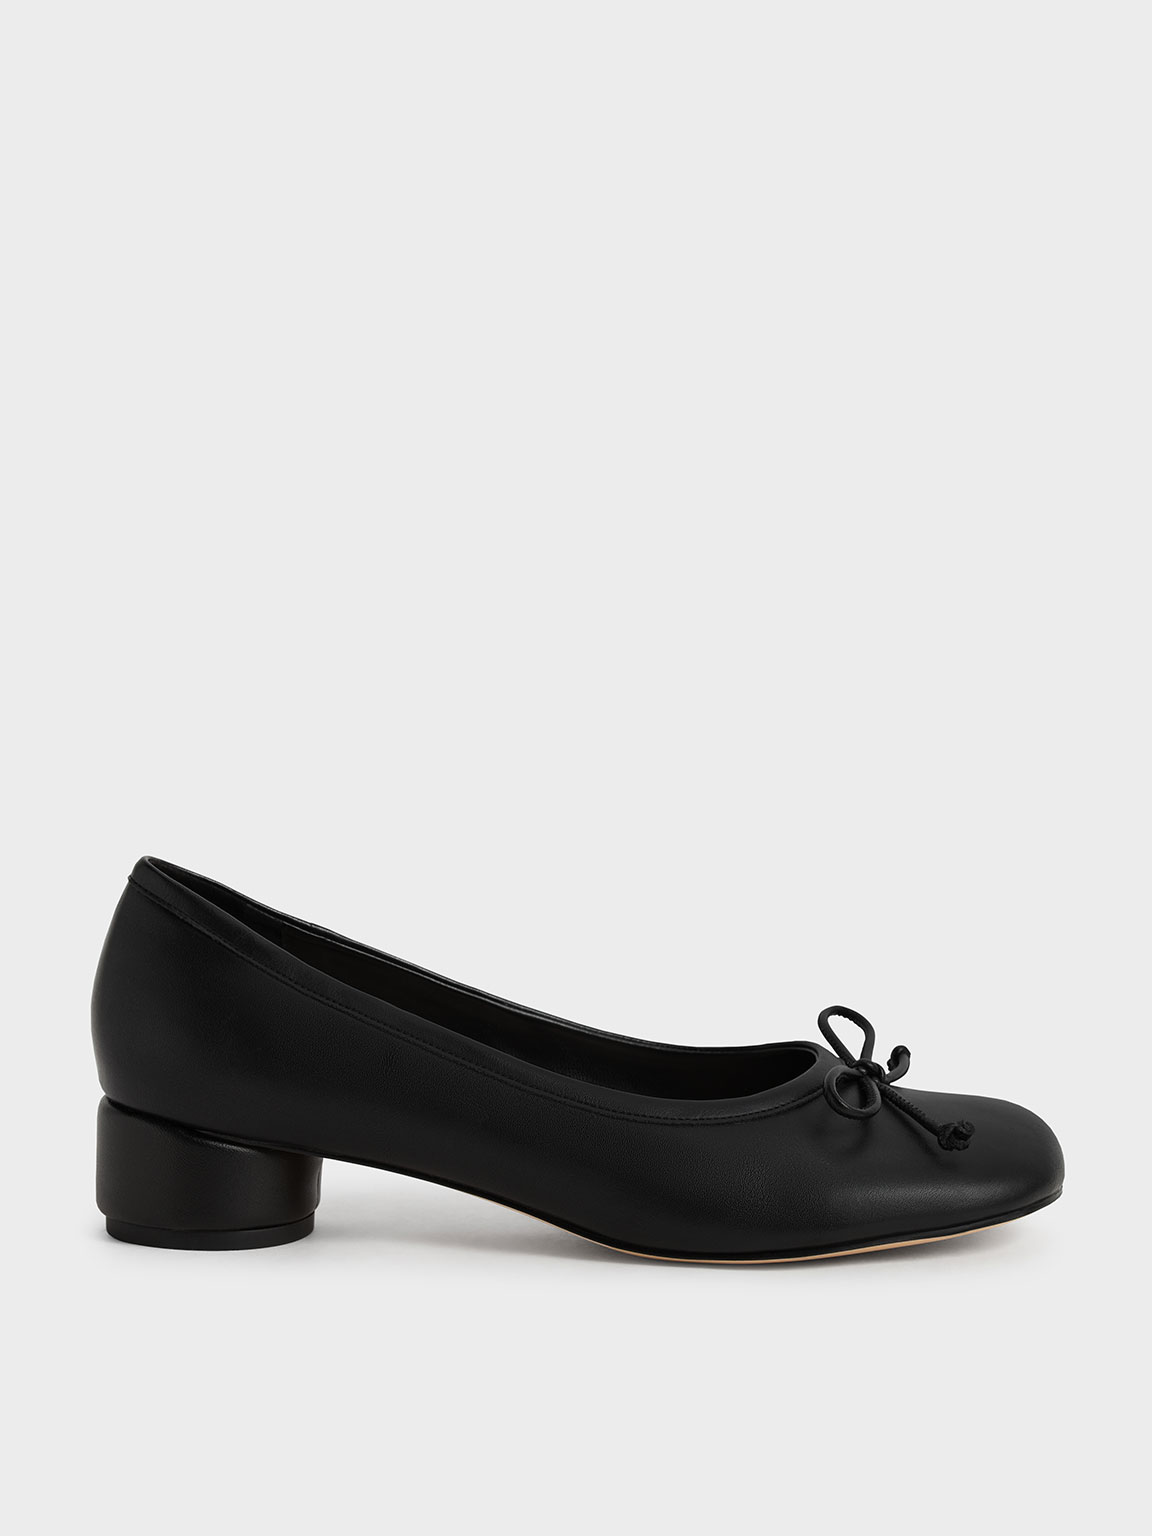 Black Bow Cylindrical Heel Pumps - CHARLES & KEITH US